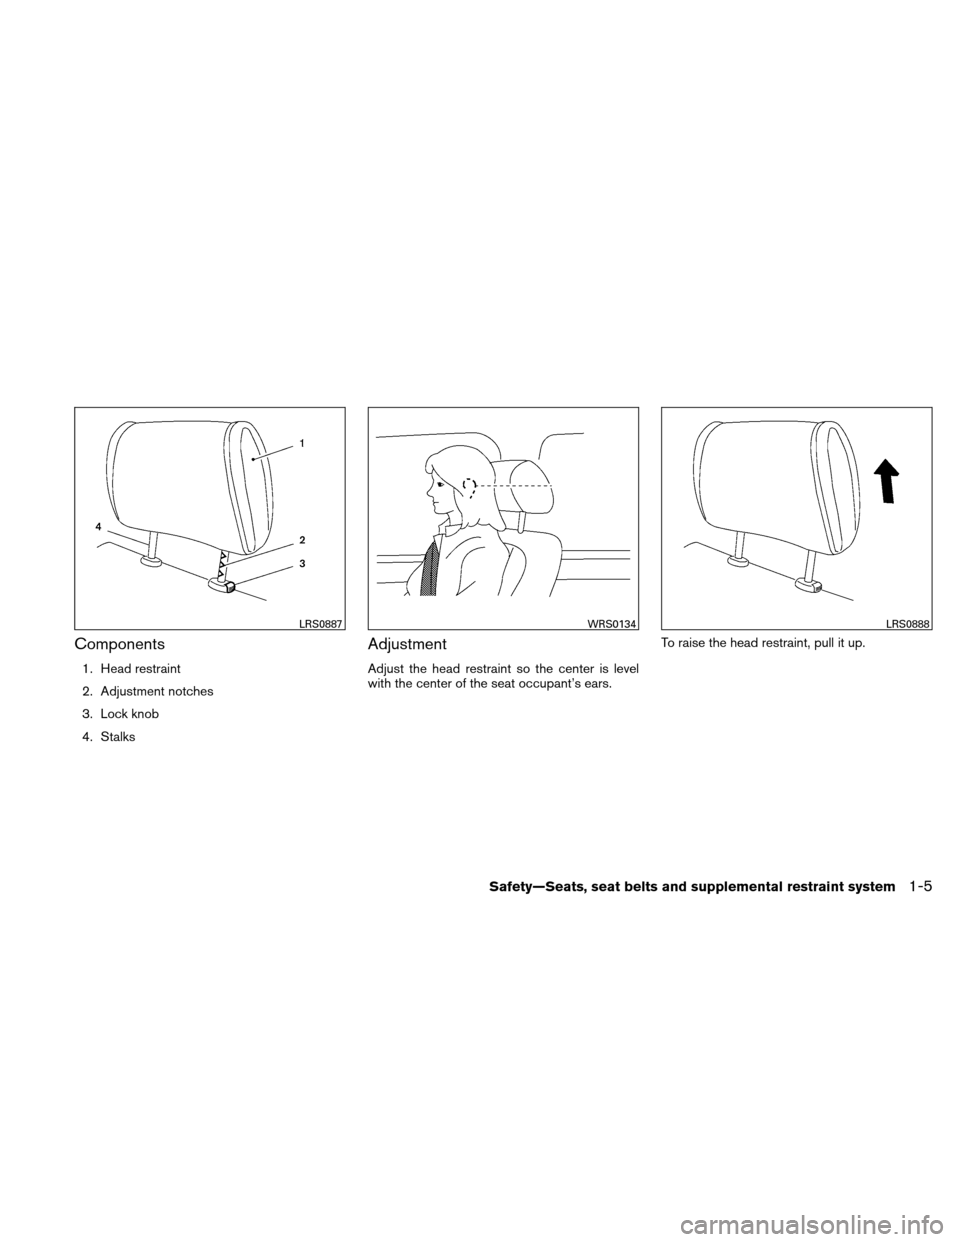 NISSAN XTERRA 2011 N50 / 2.G Owners Manual Components
1. Head restraint
2. Adjustment notches
3. Lock knob
4. Stalks
Adjustment
Adjust the head restraint so the center is level
with the center of the seat occupant’s ears.To raise the head re